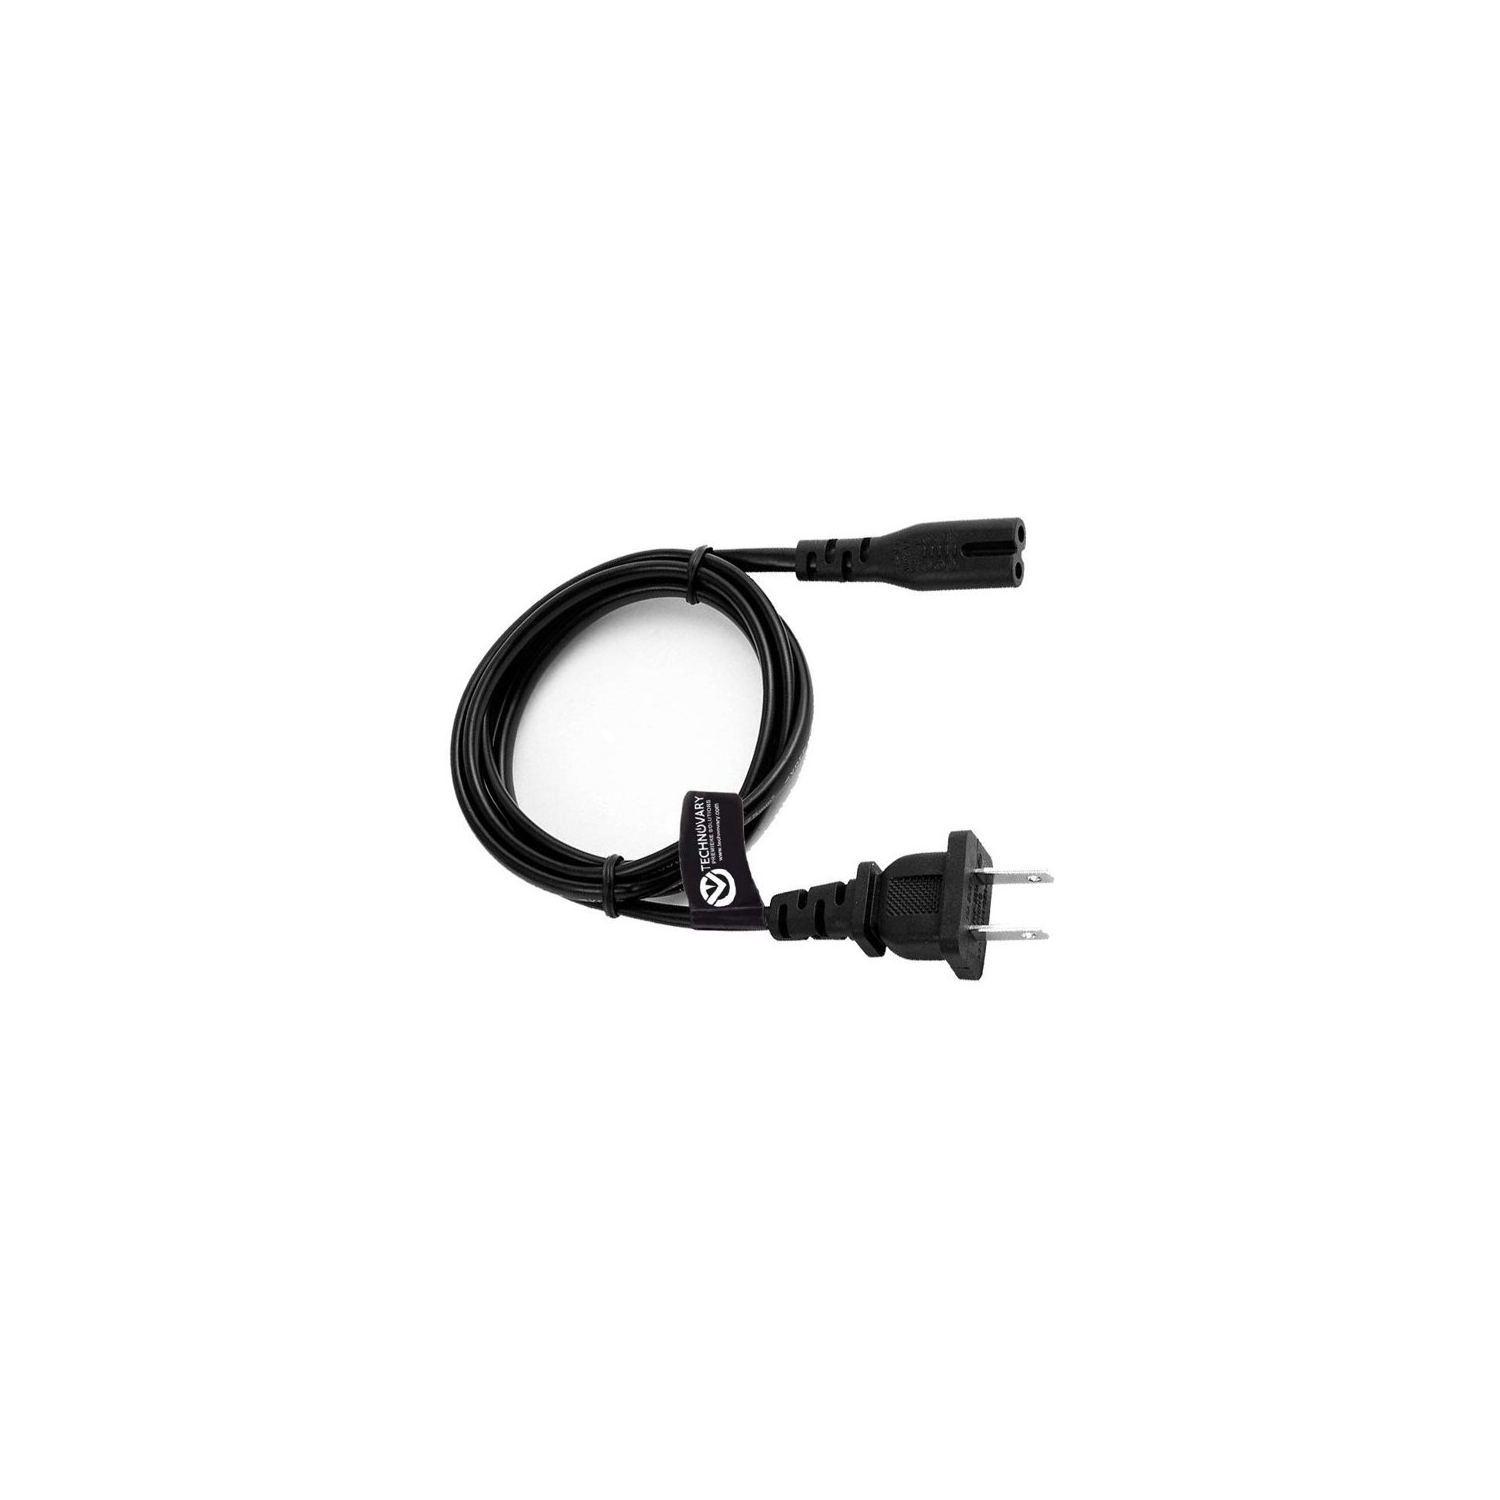 Samsung LED/LCD TV Power Cord 10ft (Specific Models Only) [Bulk Packed]